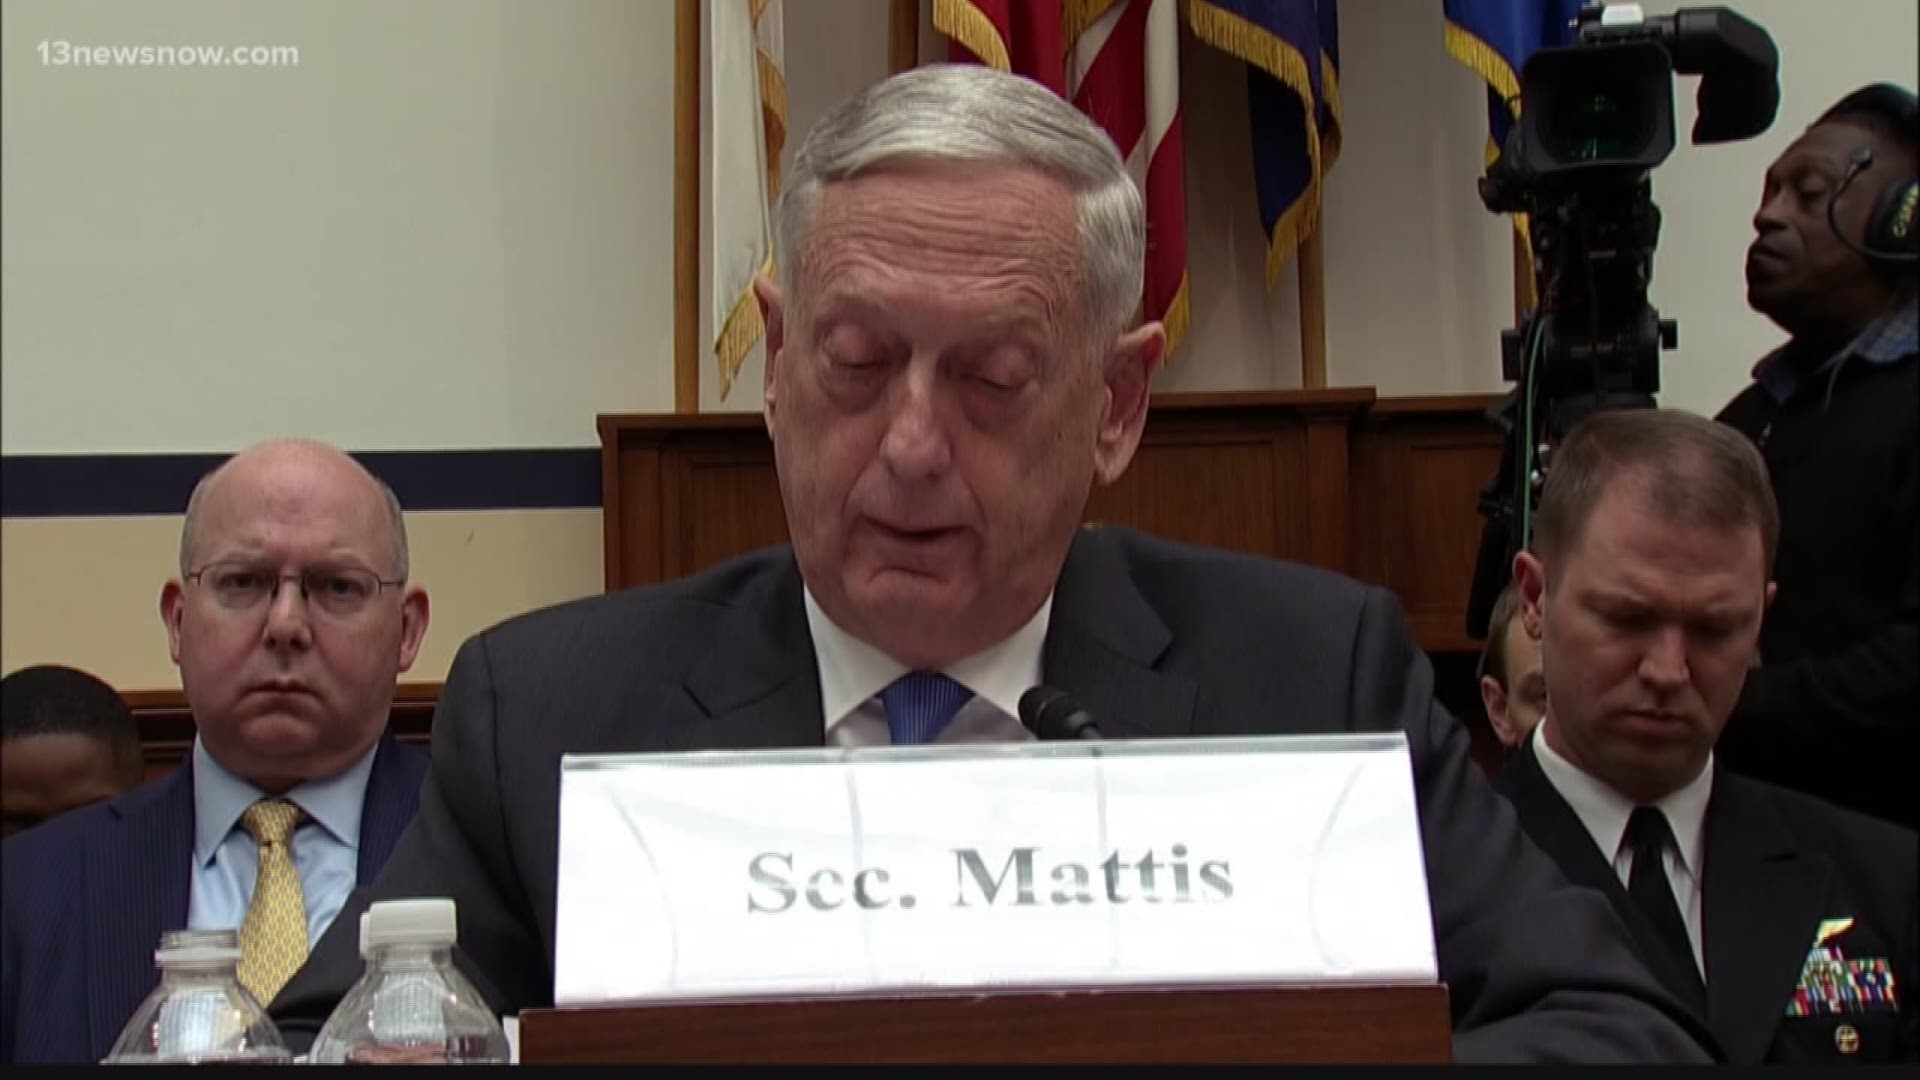 More than 120 members of Congress fired off a letter to Defense Secretary James Mattis, demanding a reversal to the Trump administration's ban on most transgender troops in the military.